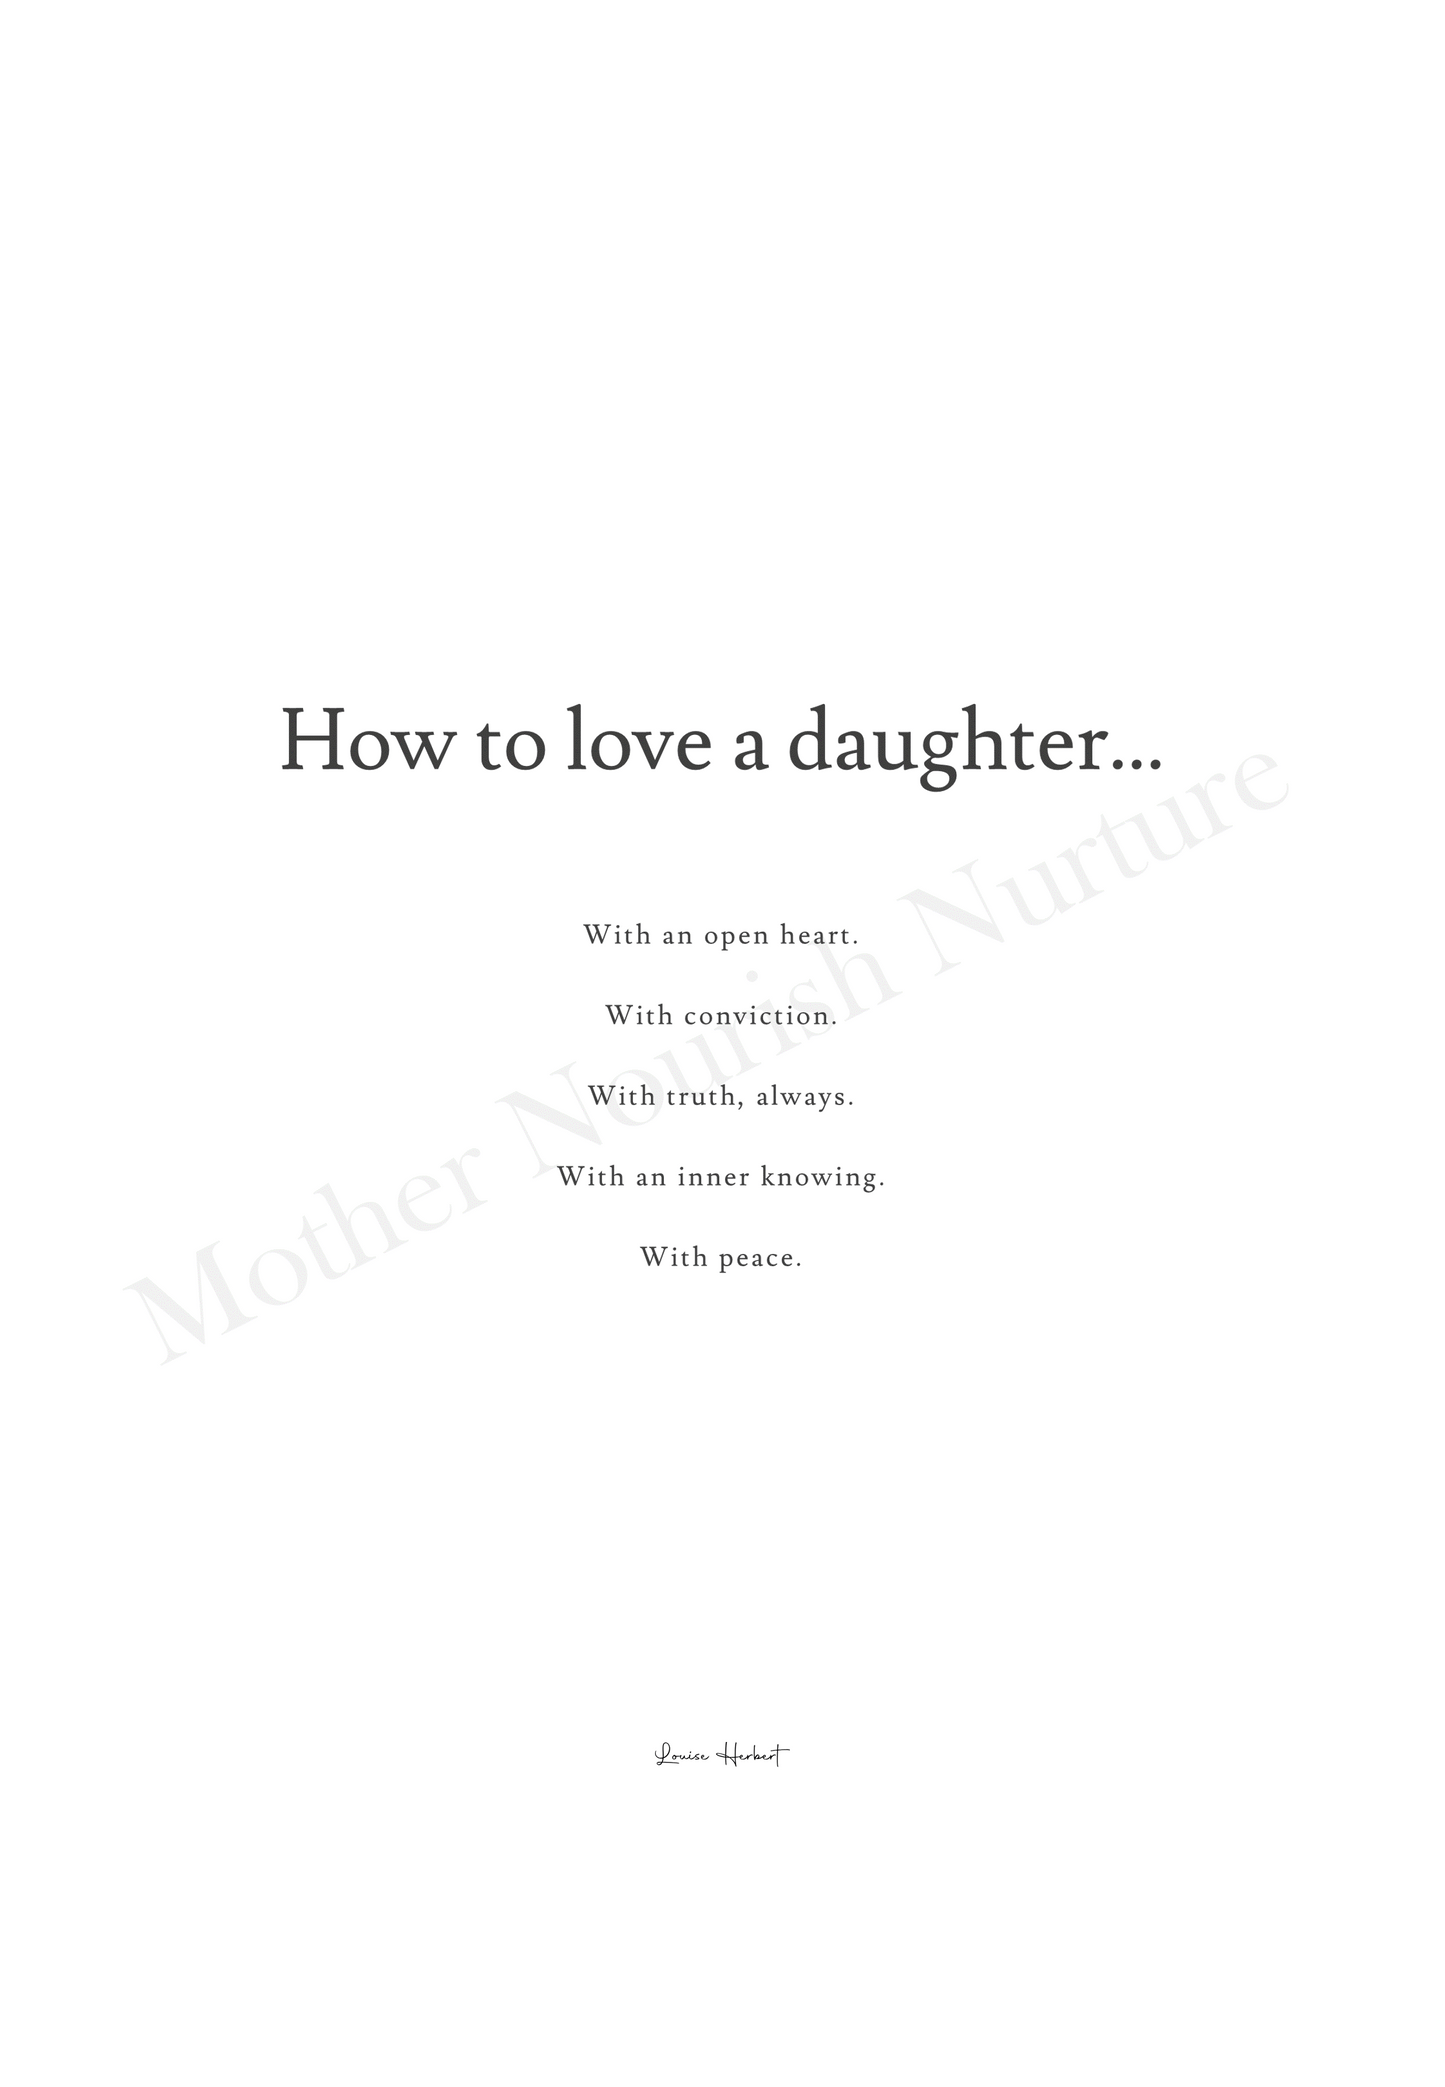 How To Love A Daughter - Digital PDF